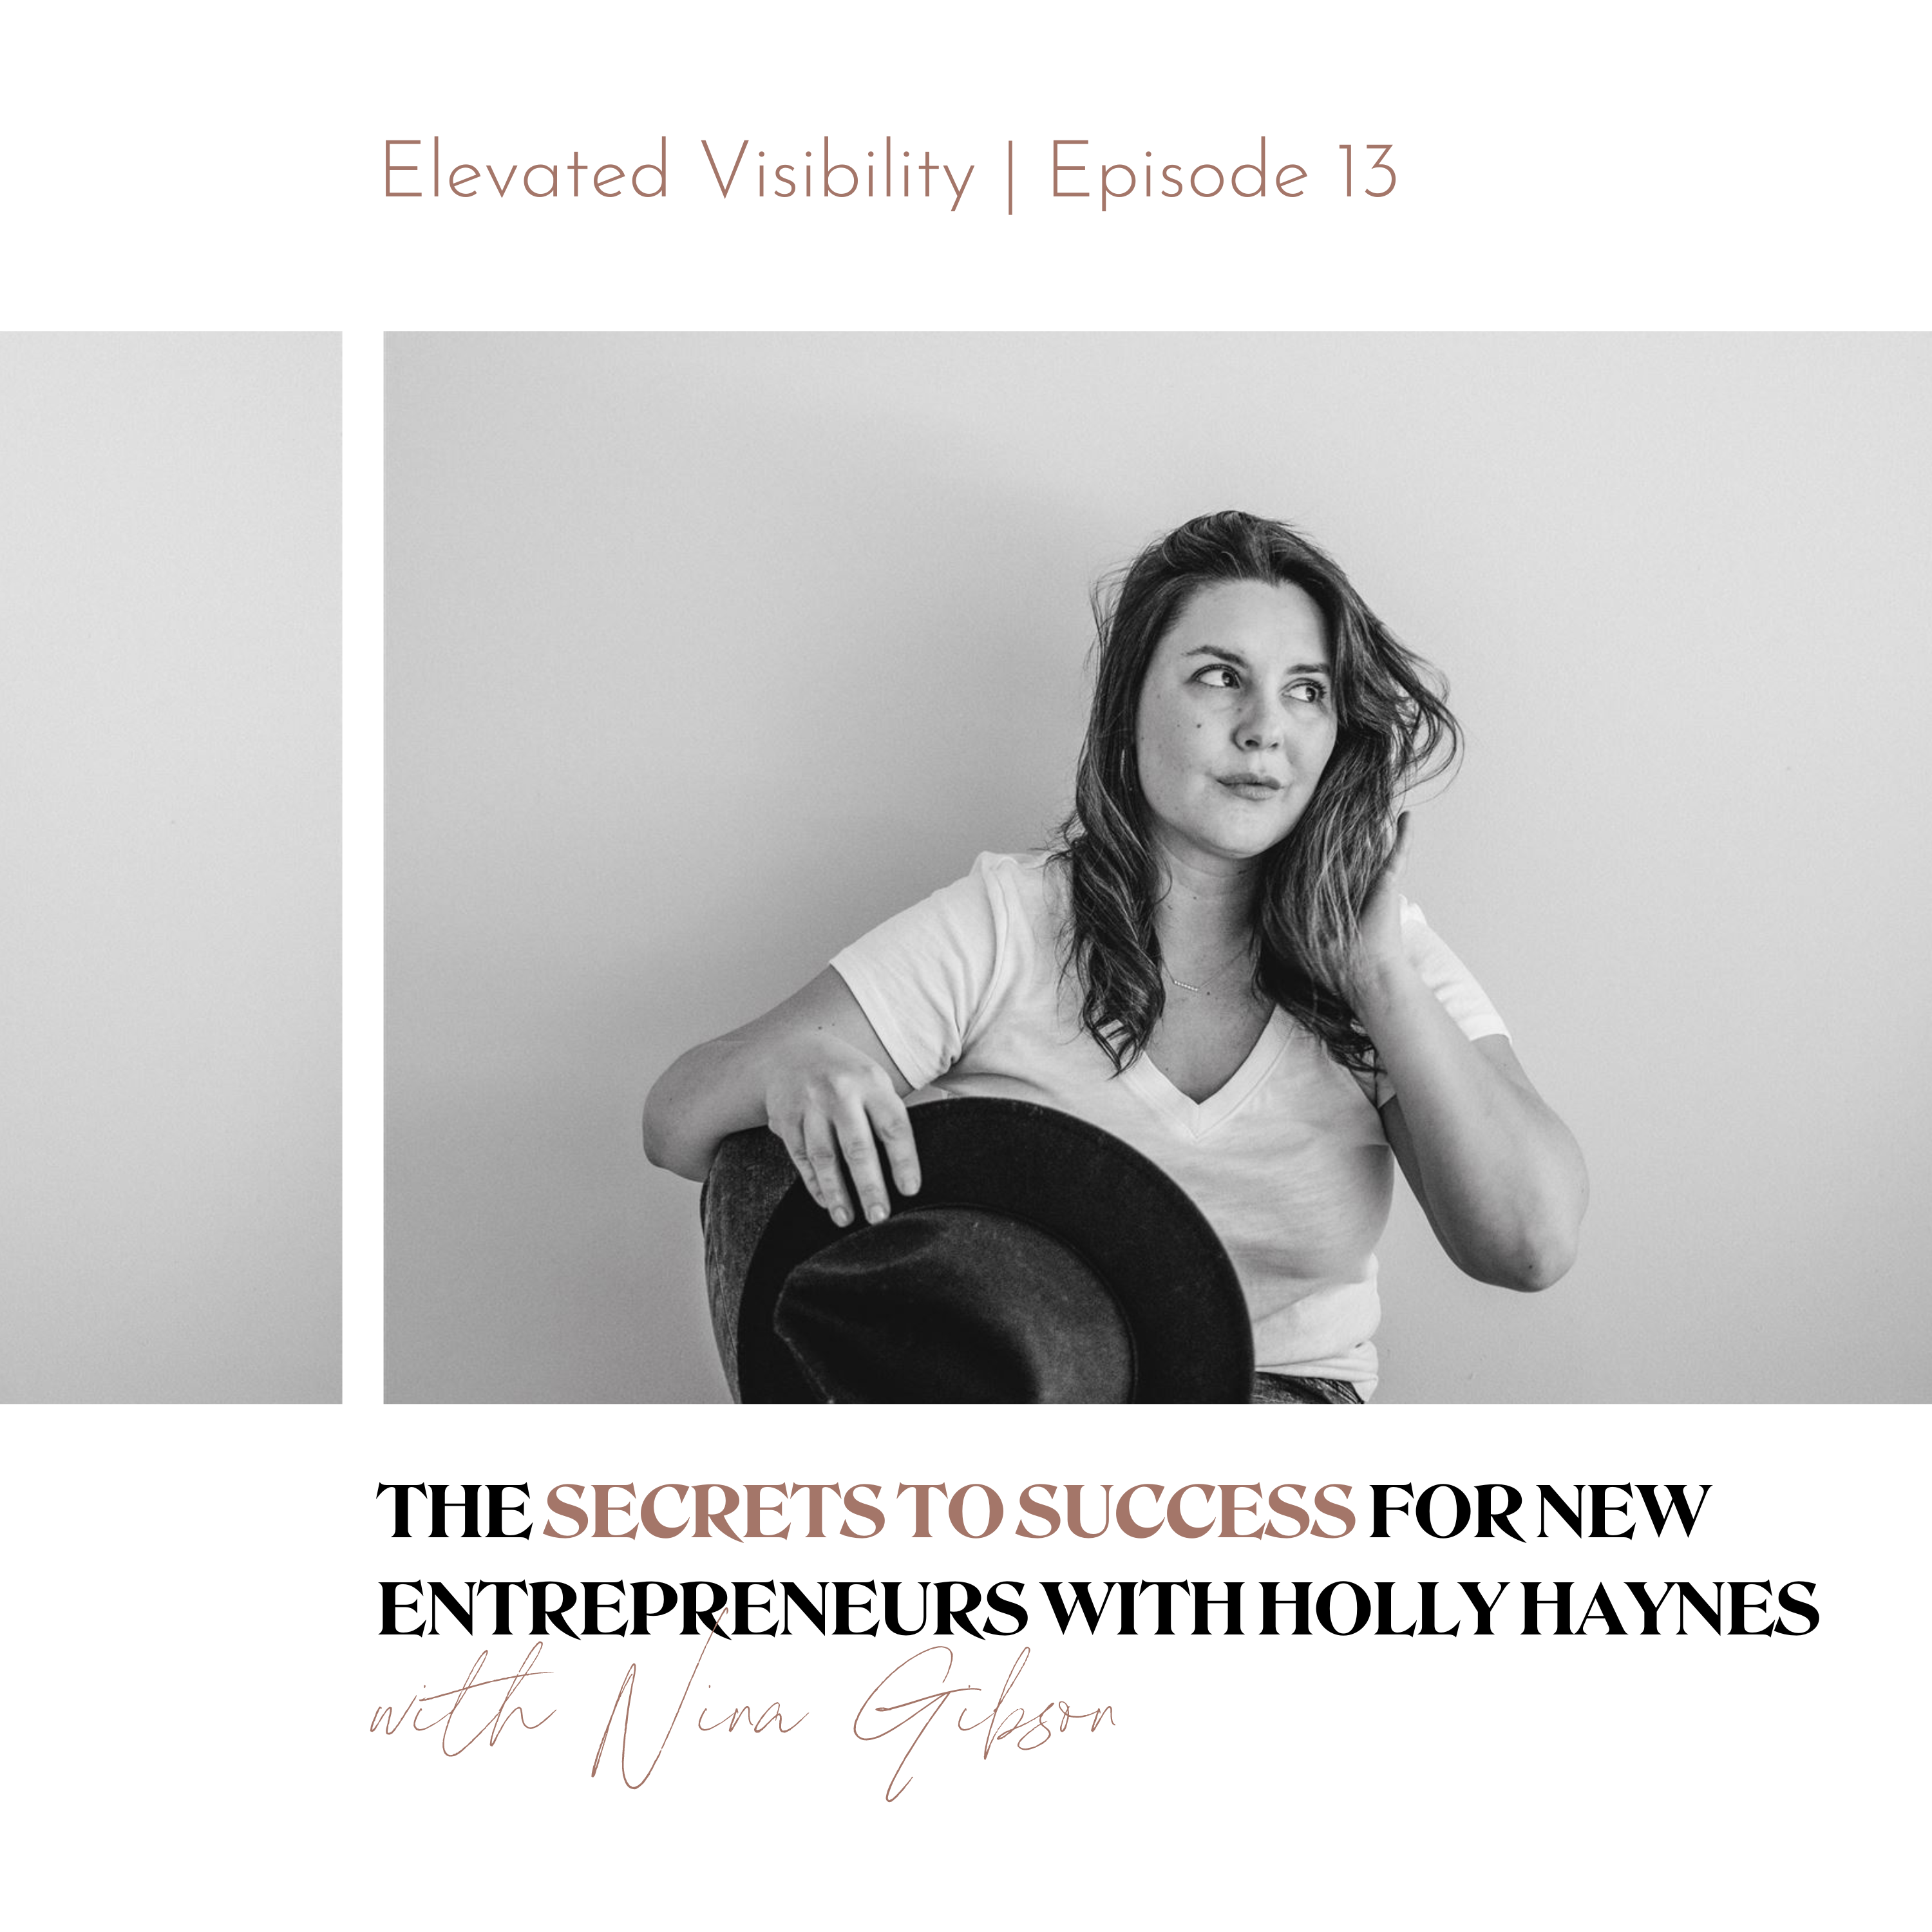 Elevated Visibility Podcast E13 The Secrets to Success for New Entrepreneurs With Holly Haynes